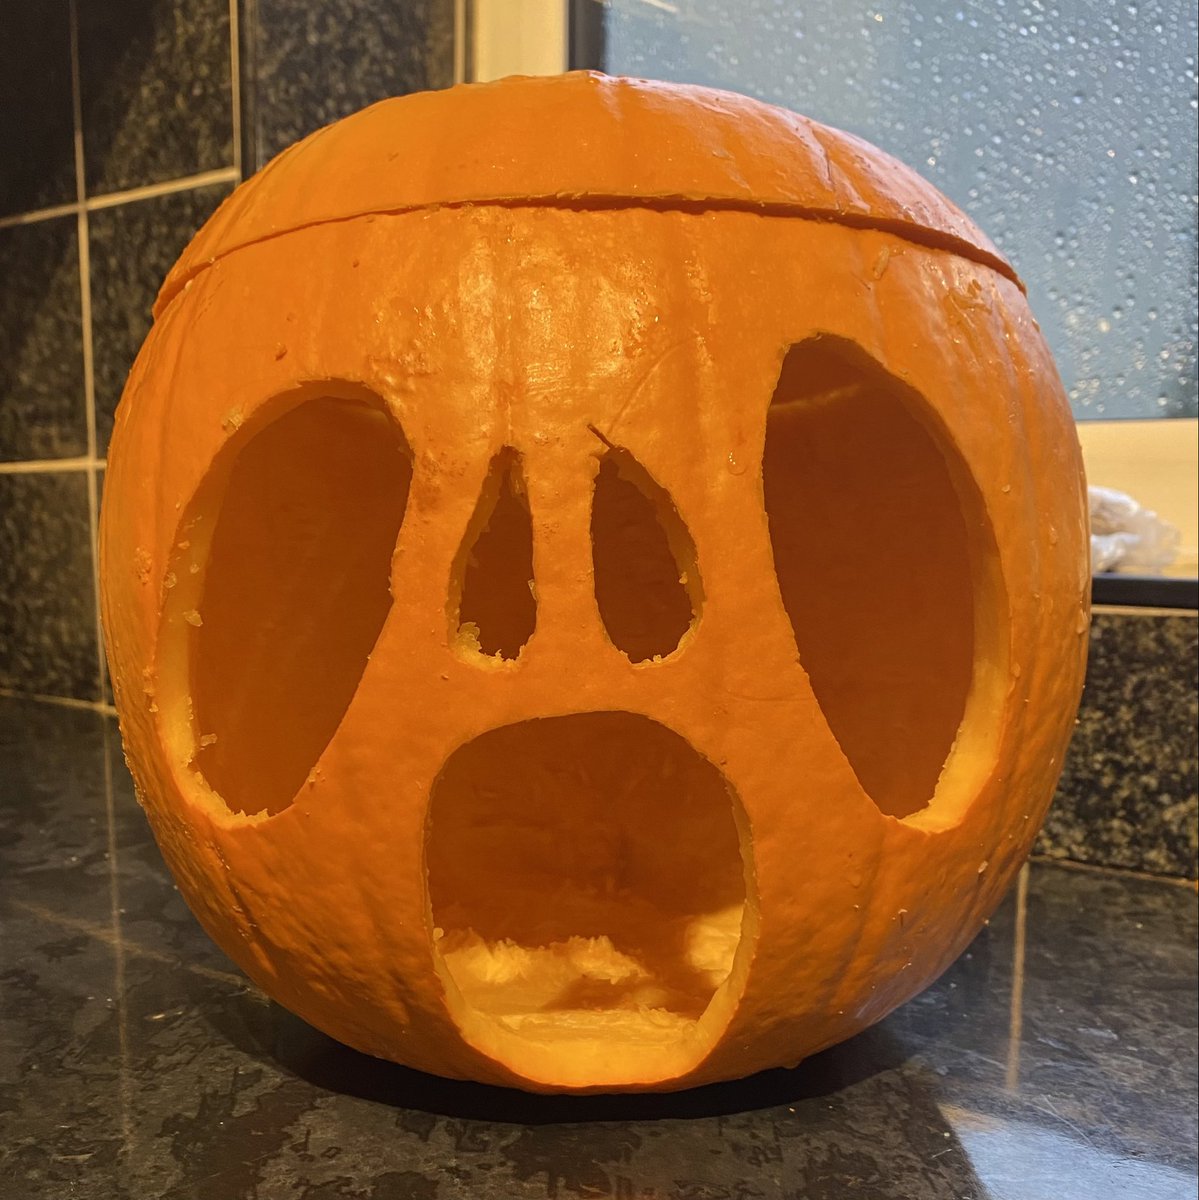 Torrential rain here today so Nye decided to carve his pumpkin… he was really pleased with his efforts 🎃